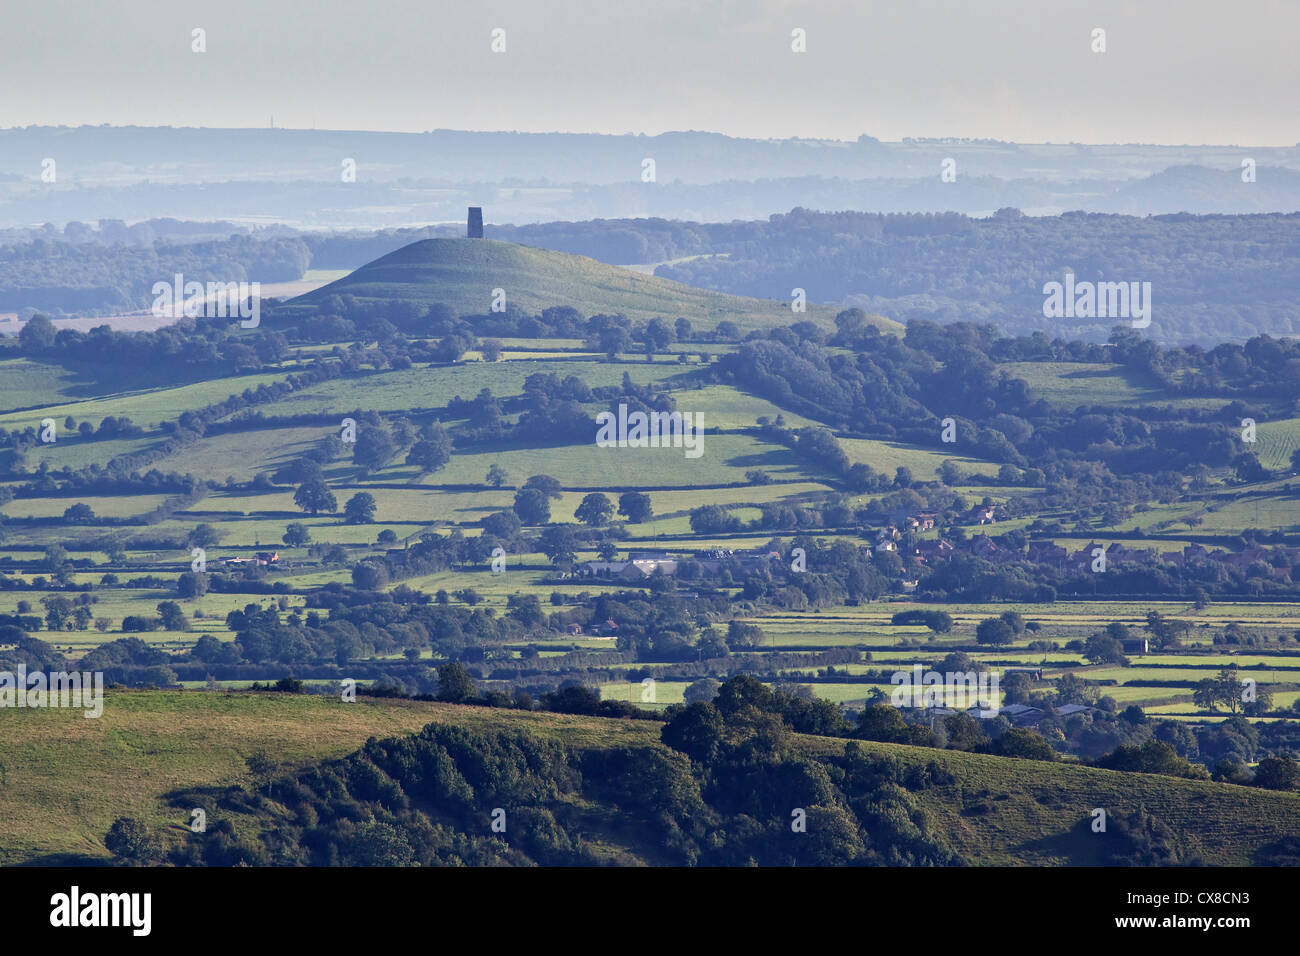 A view of Glastonbury Tor taken from the Mendip Hills looking across the Somerset Levels, UK Stock Photo